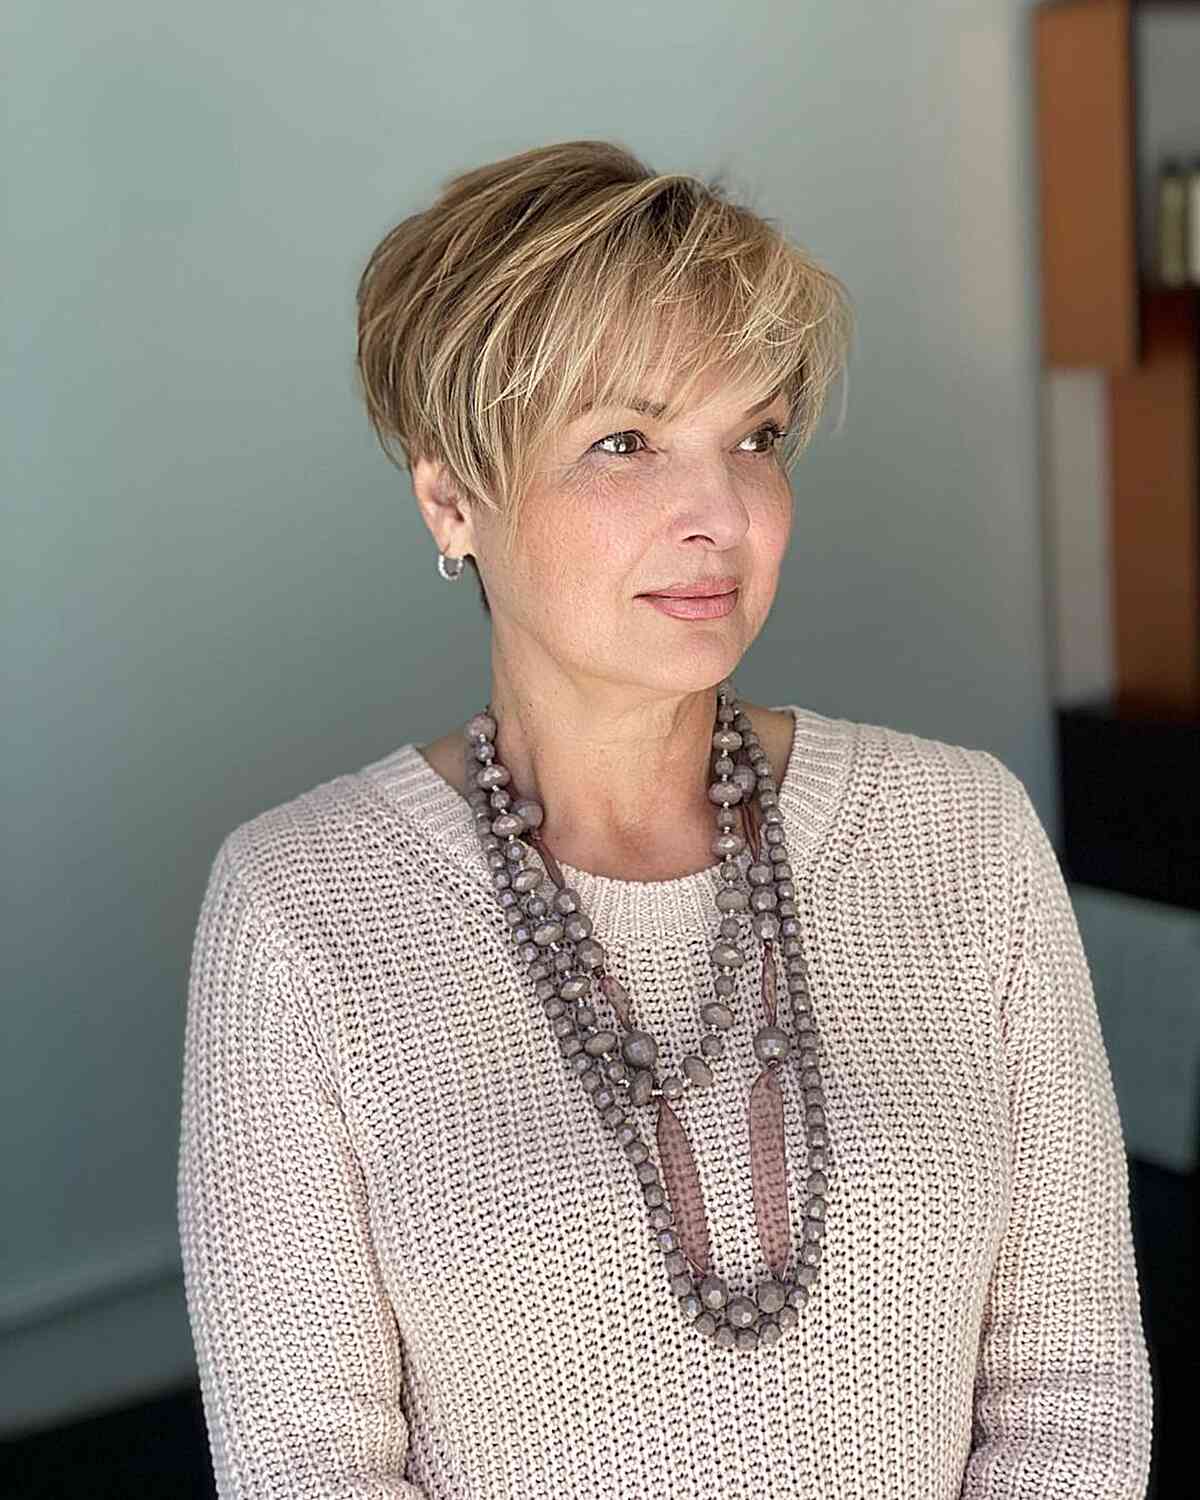 Chic Pixie Cut with Partial Highlights for older women with short hair